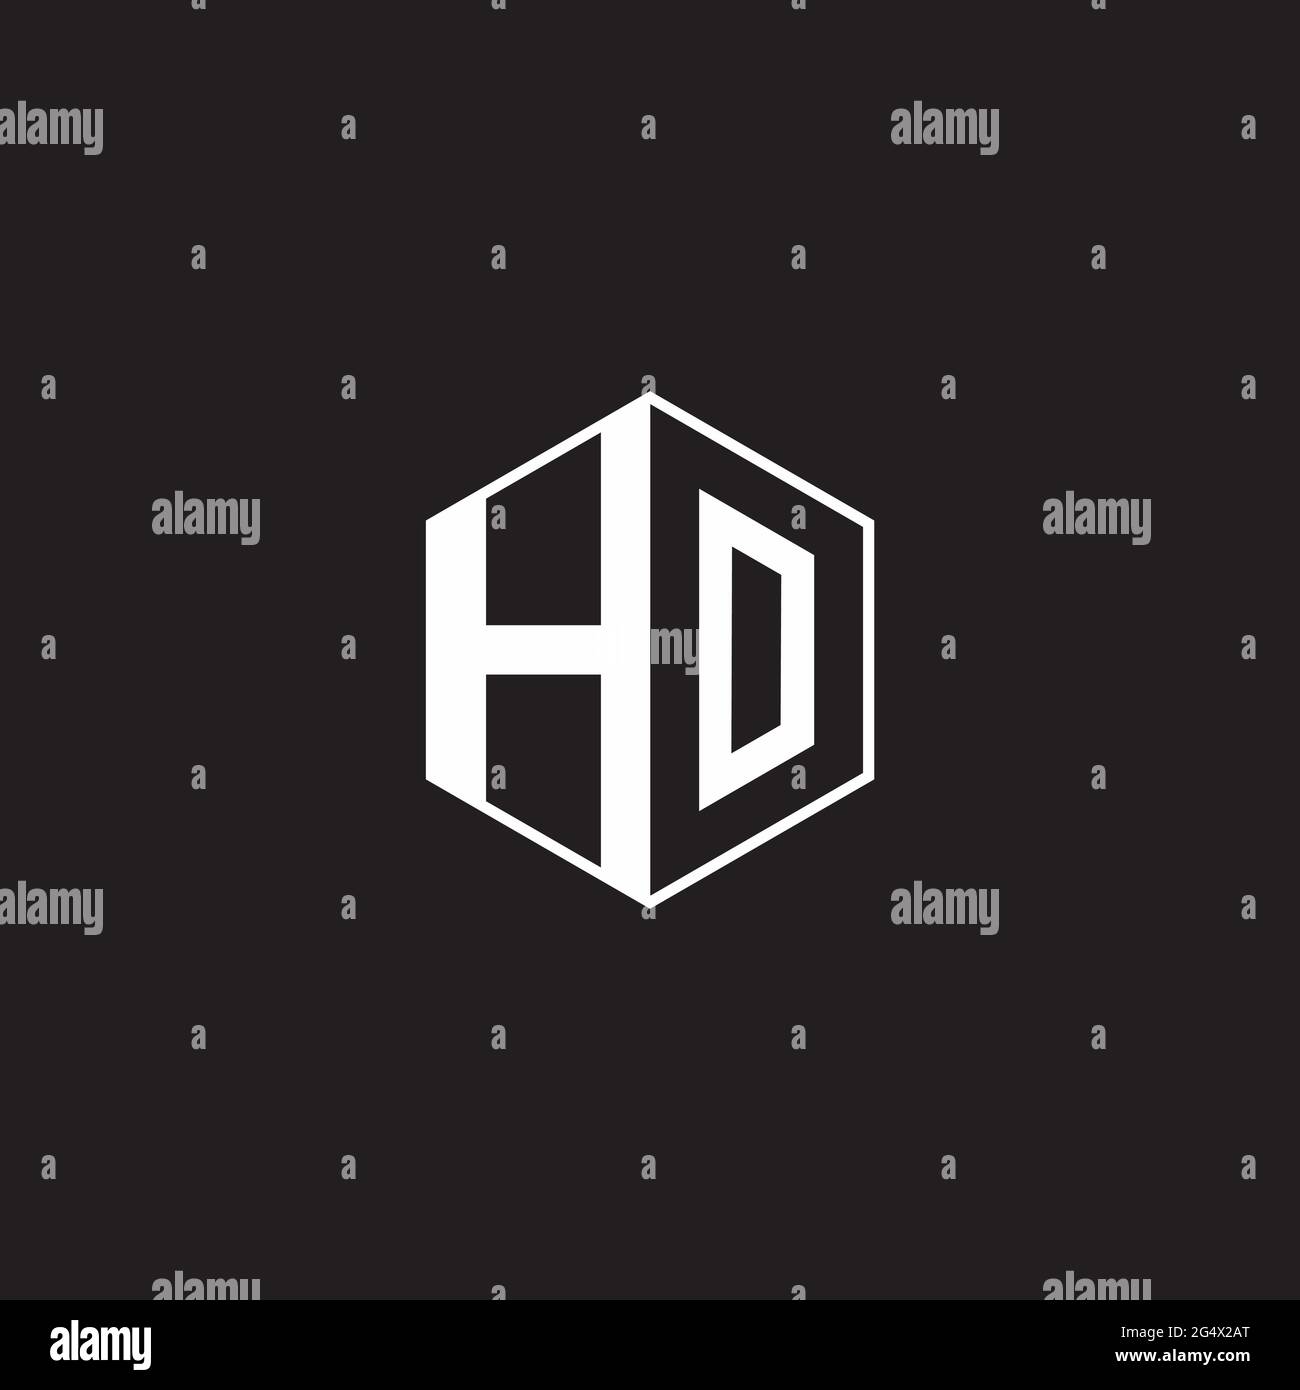 HO H O OH Logo monogram hexagon with black background negative space style Stock Vector